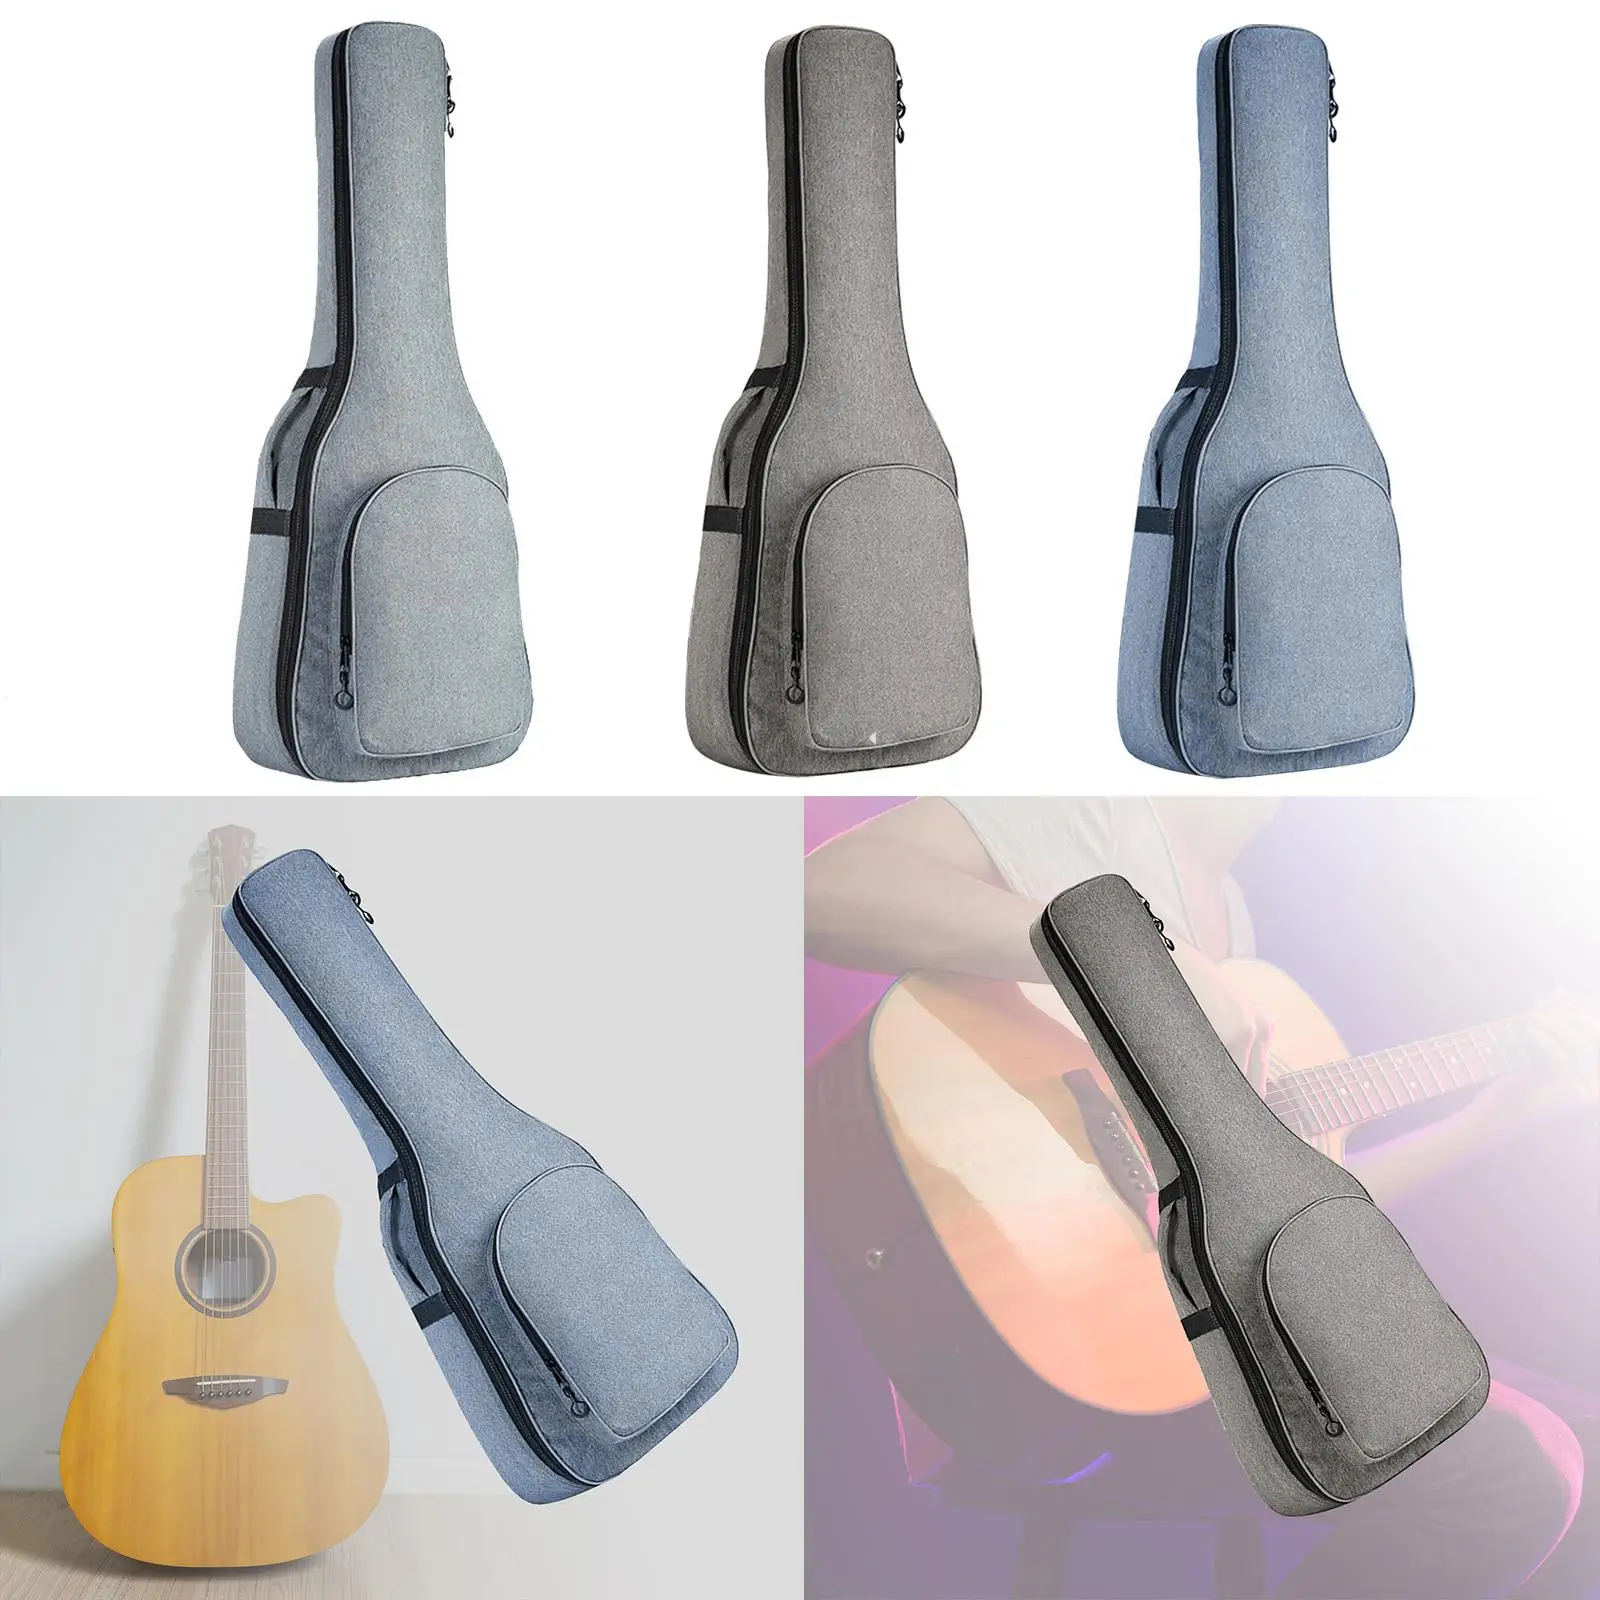 Guitar Gig Bag Thickened Oxford Cloth Portable Waterproof Sturdy Durable for Electrical Folk Acoustic Classical Guitar Accessory